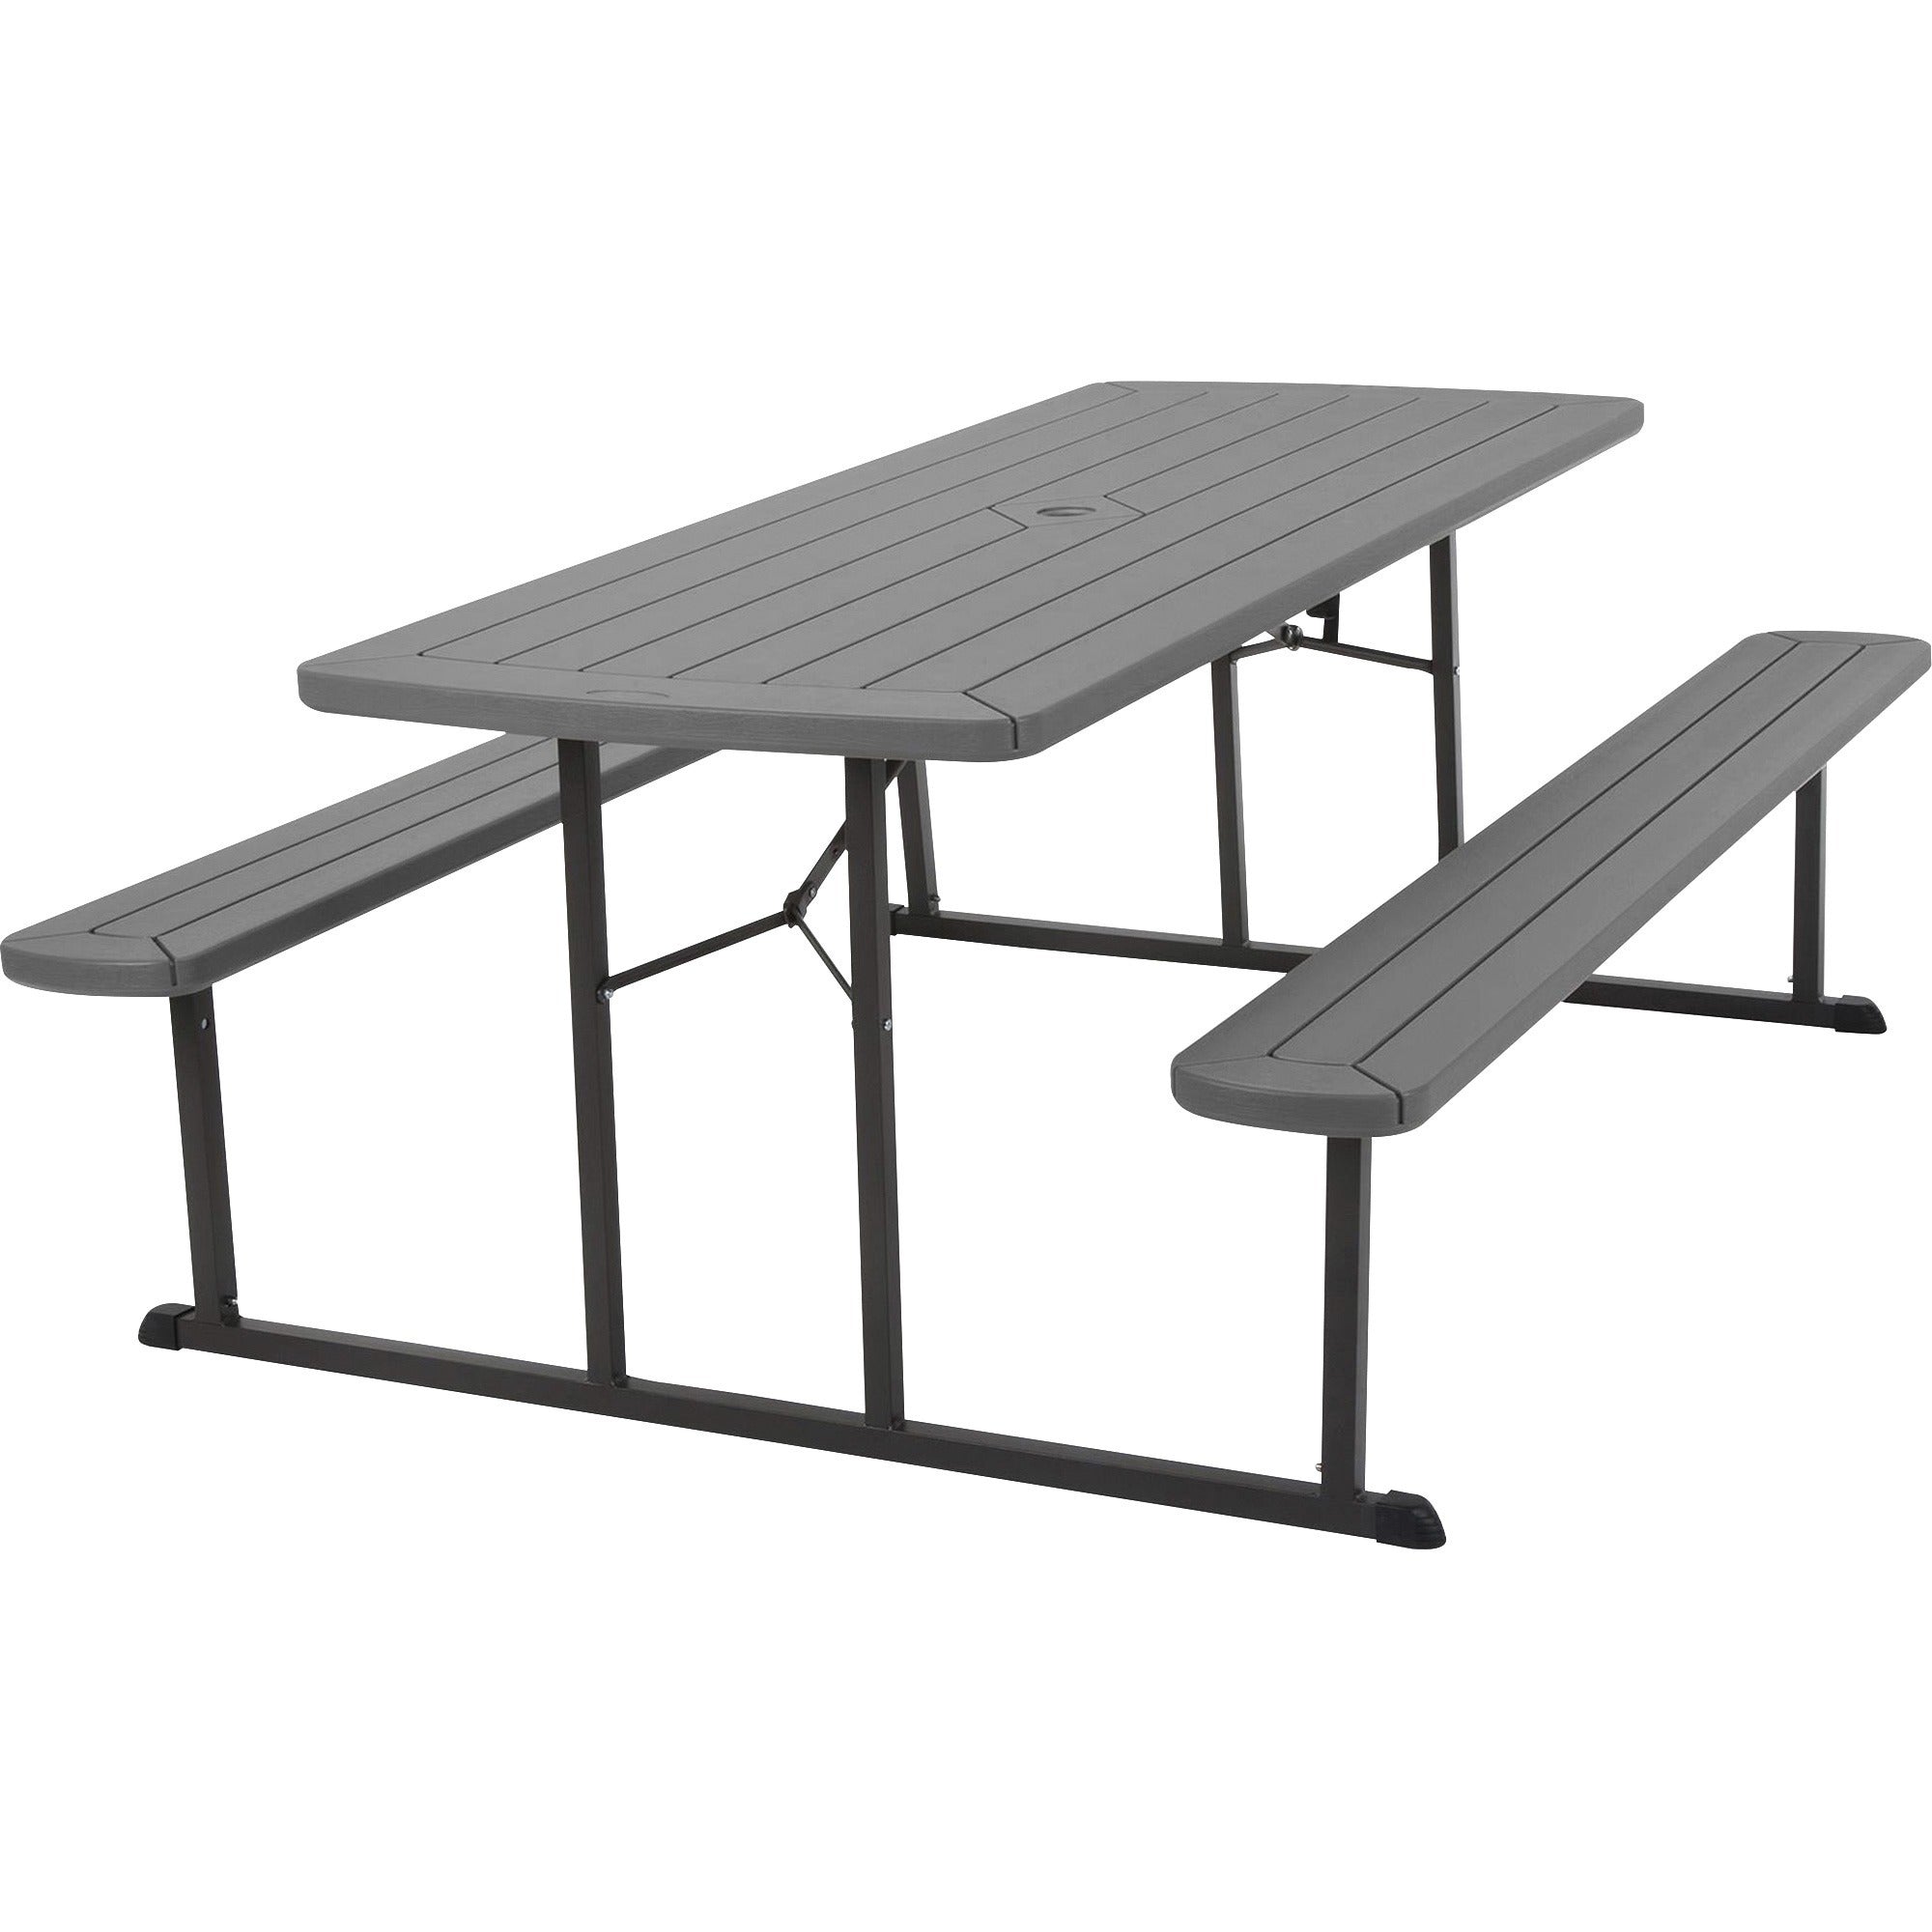 cosco-folding-picnic-table-for-table-toptaupe-top-800-lb-capacity-x-72-table-top-width-x-57-table-top-depth-29-height-wood-grain-resin-top-material-1-each_csc87902dgr1e - 1